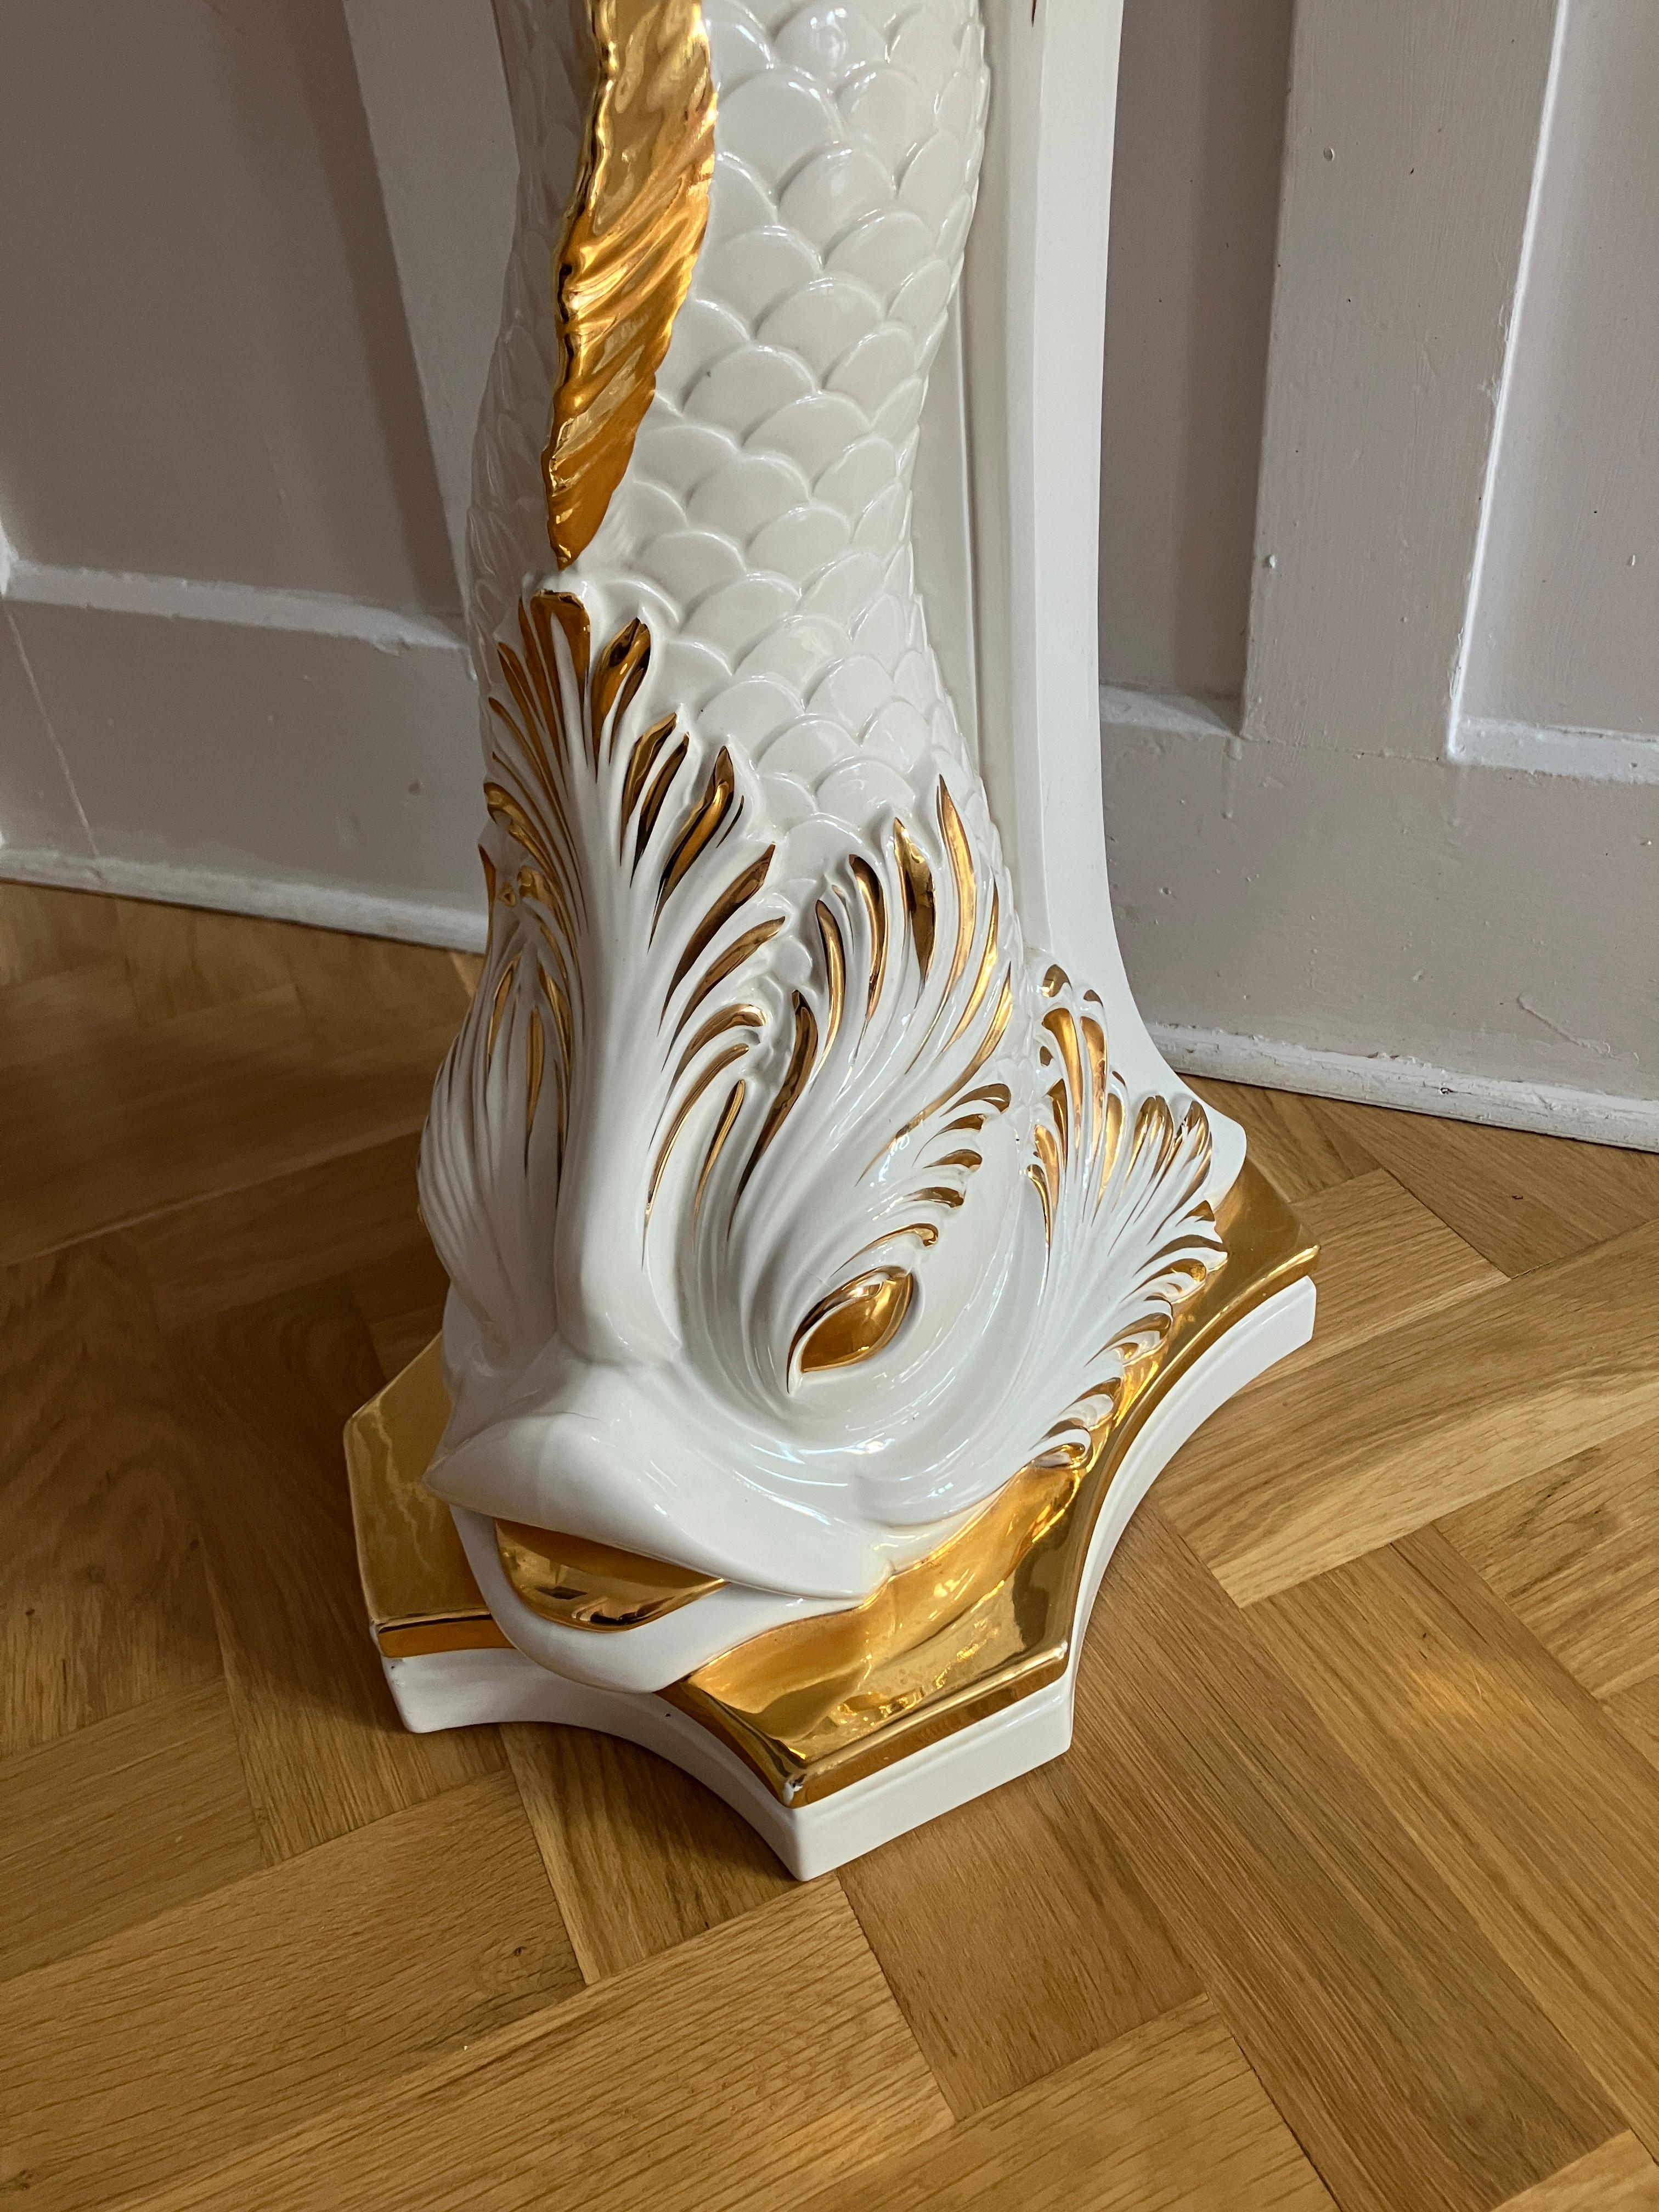 Signed Large Porcelain Pedestal Gold Fish by Carroro Vittorio Made in Italy 2